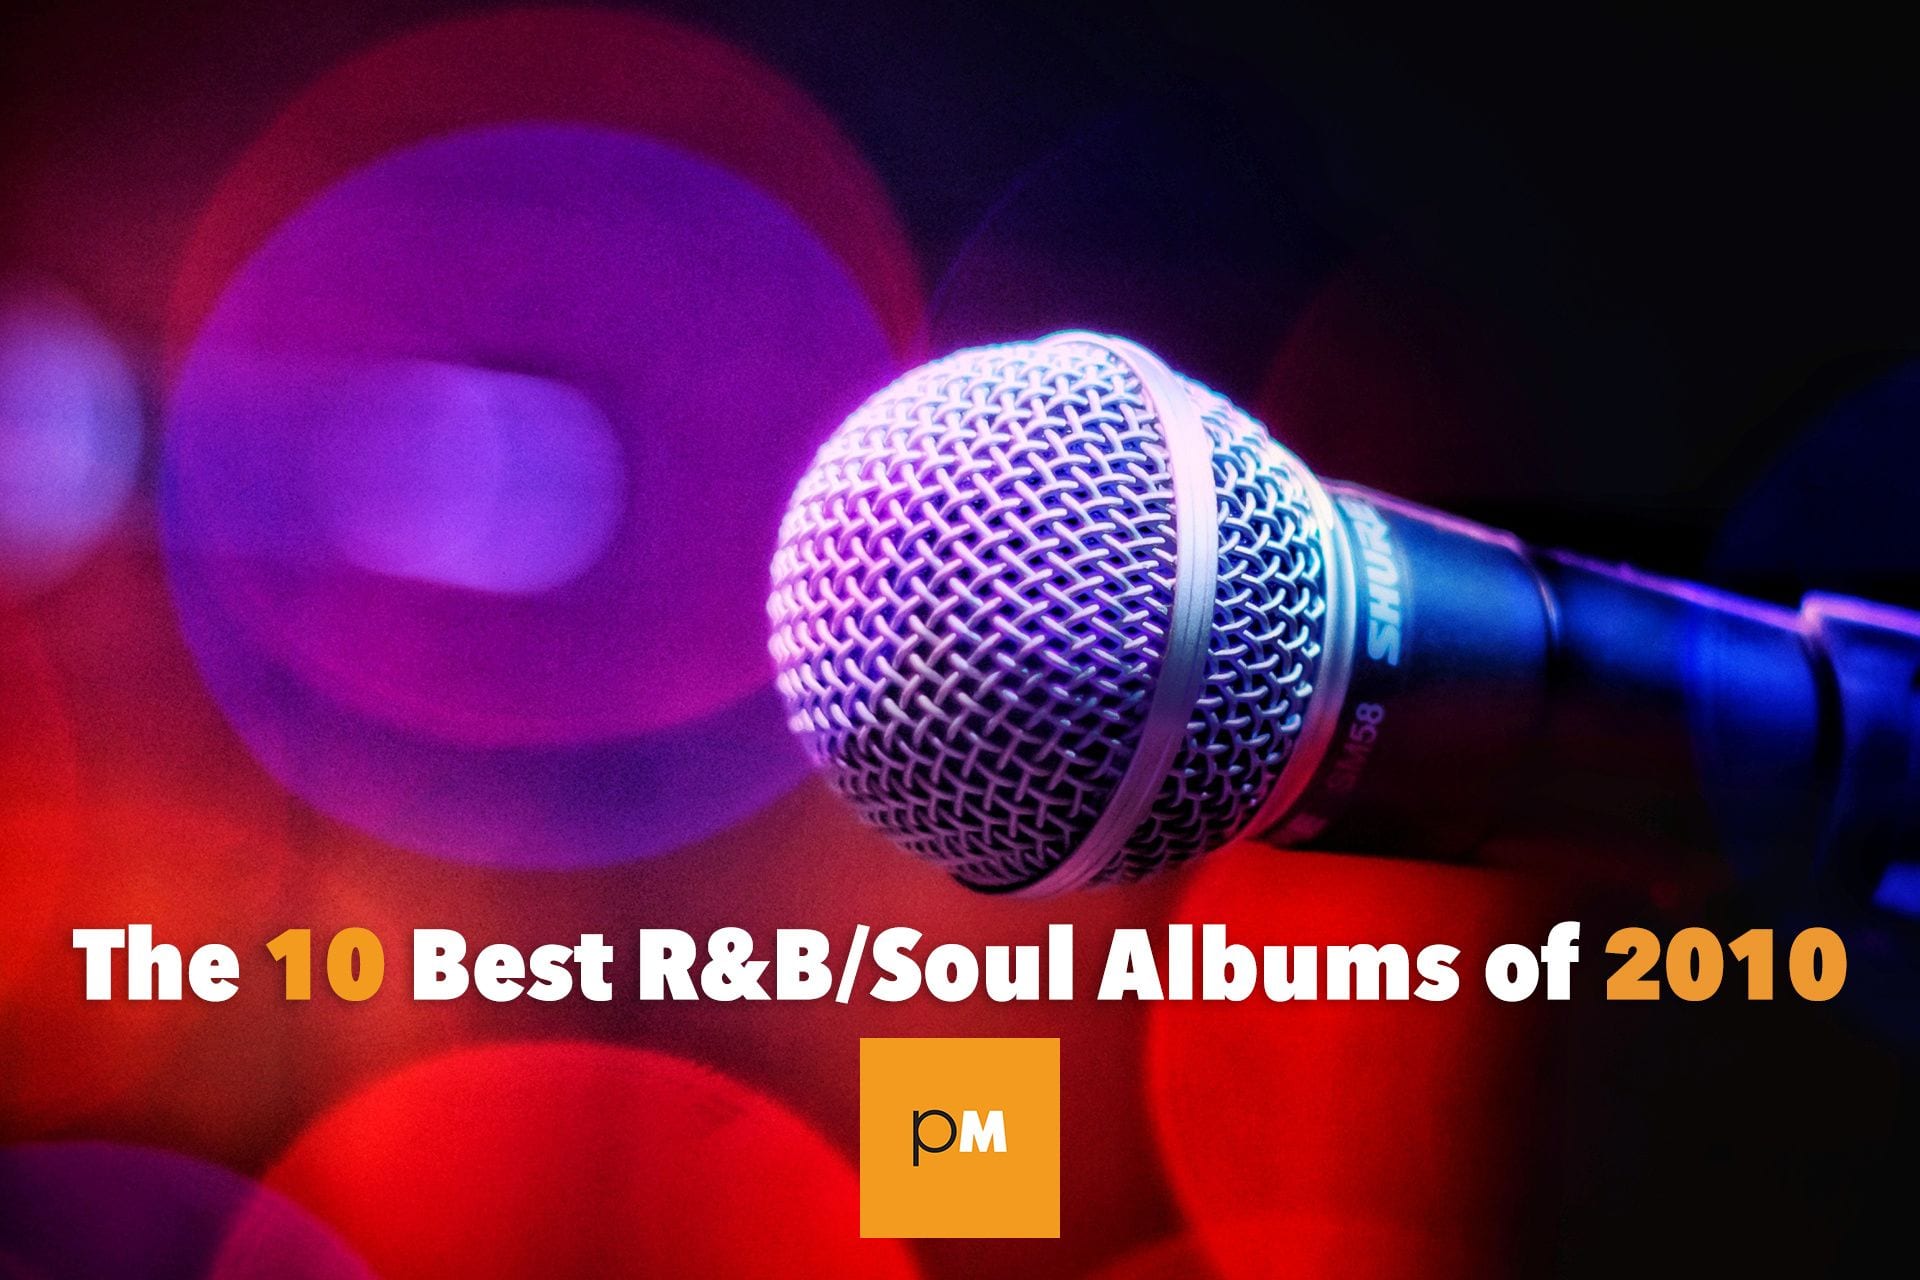 The 10 Best R&B/Soul Albums of 2010